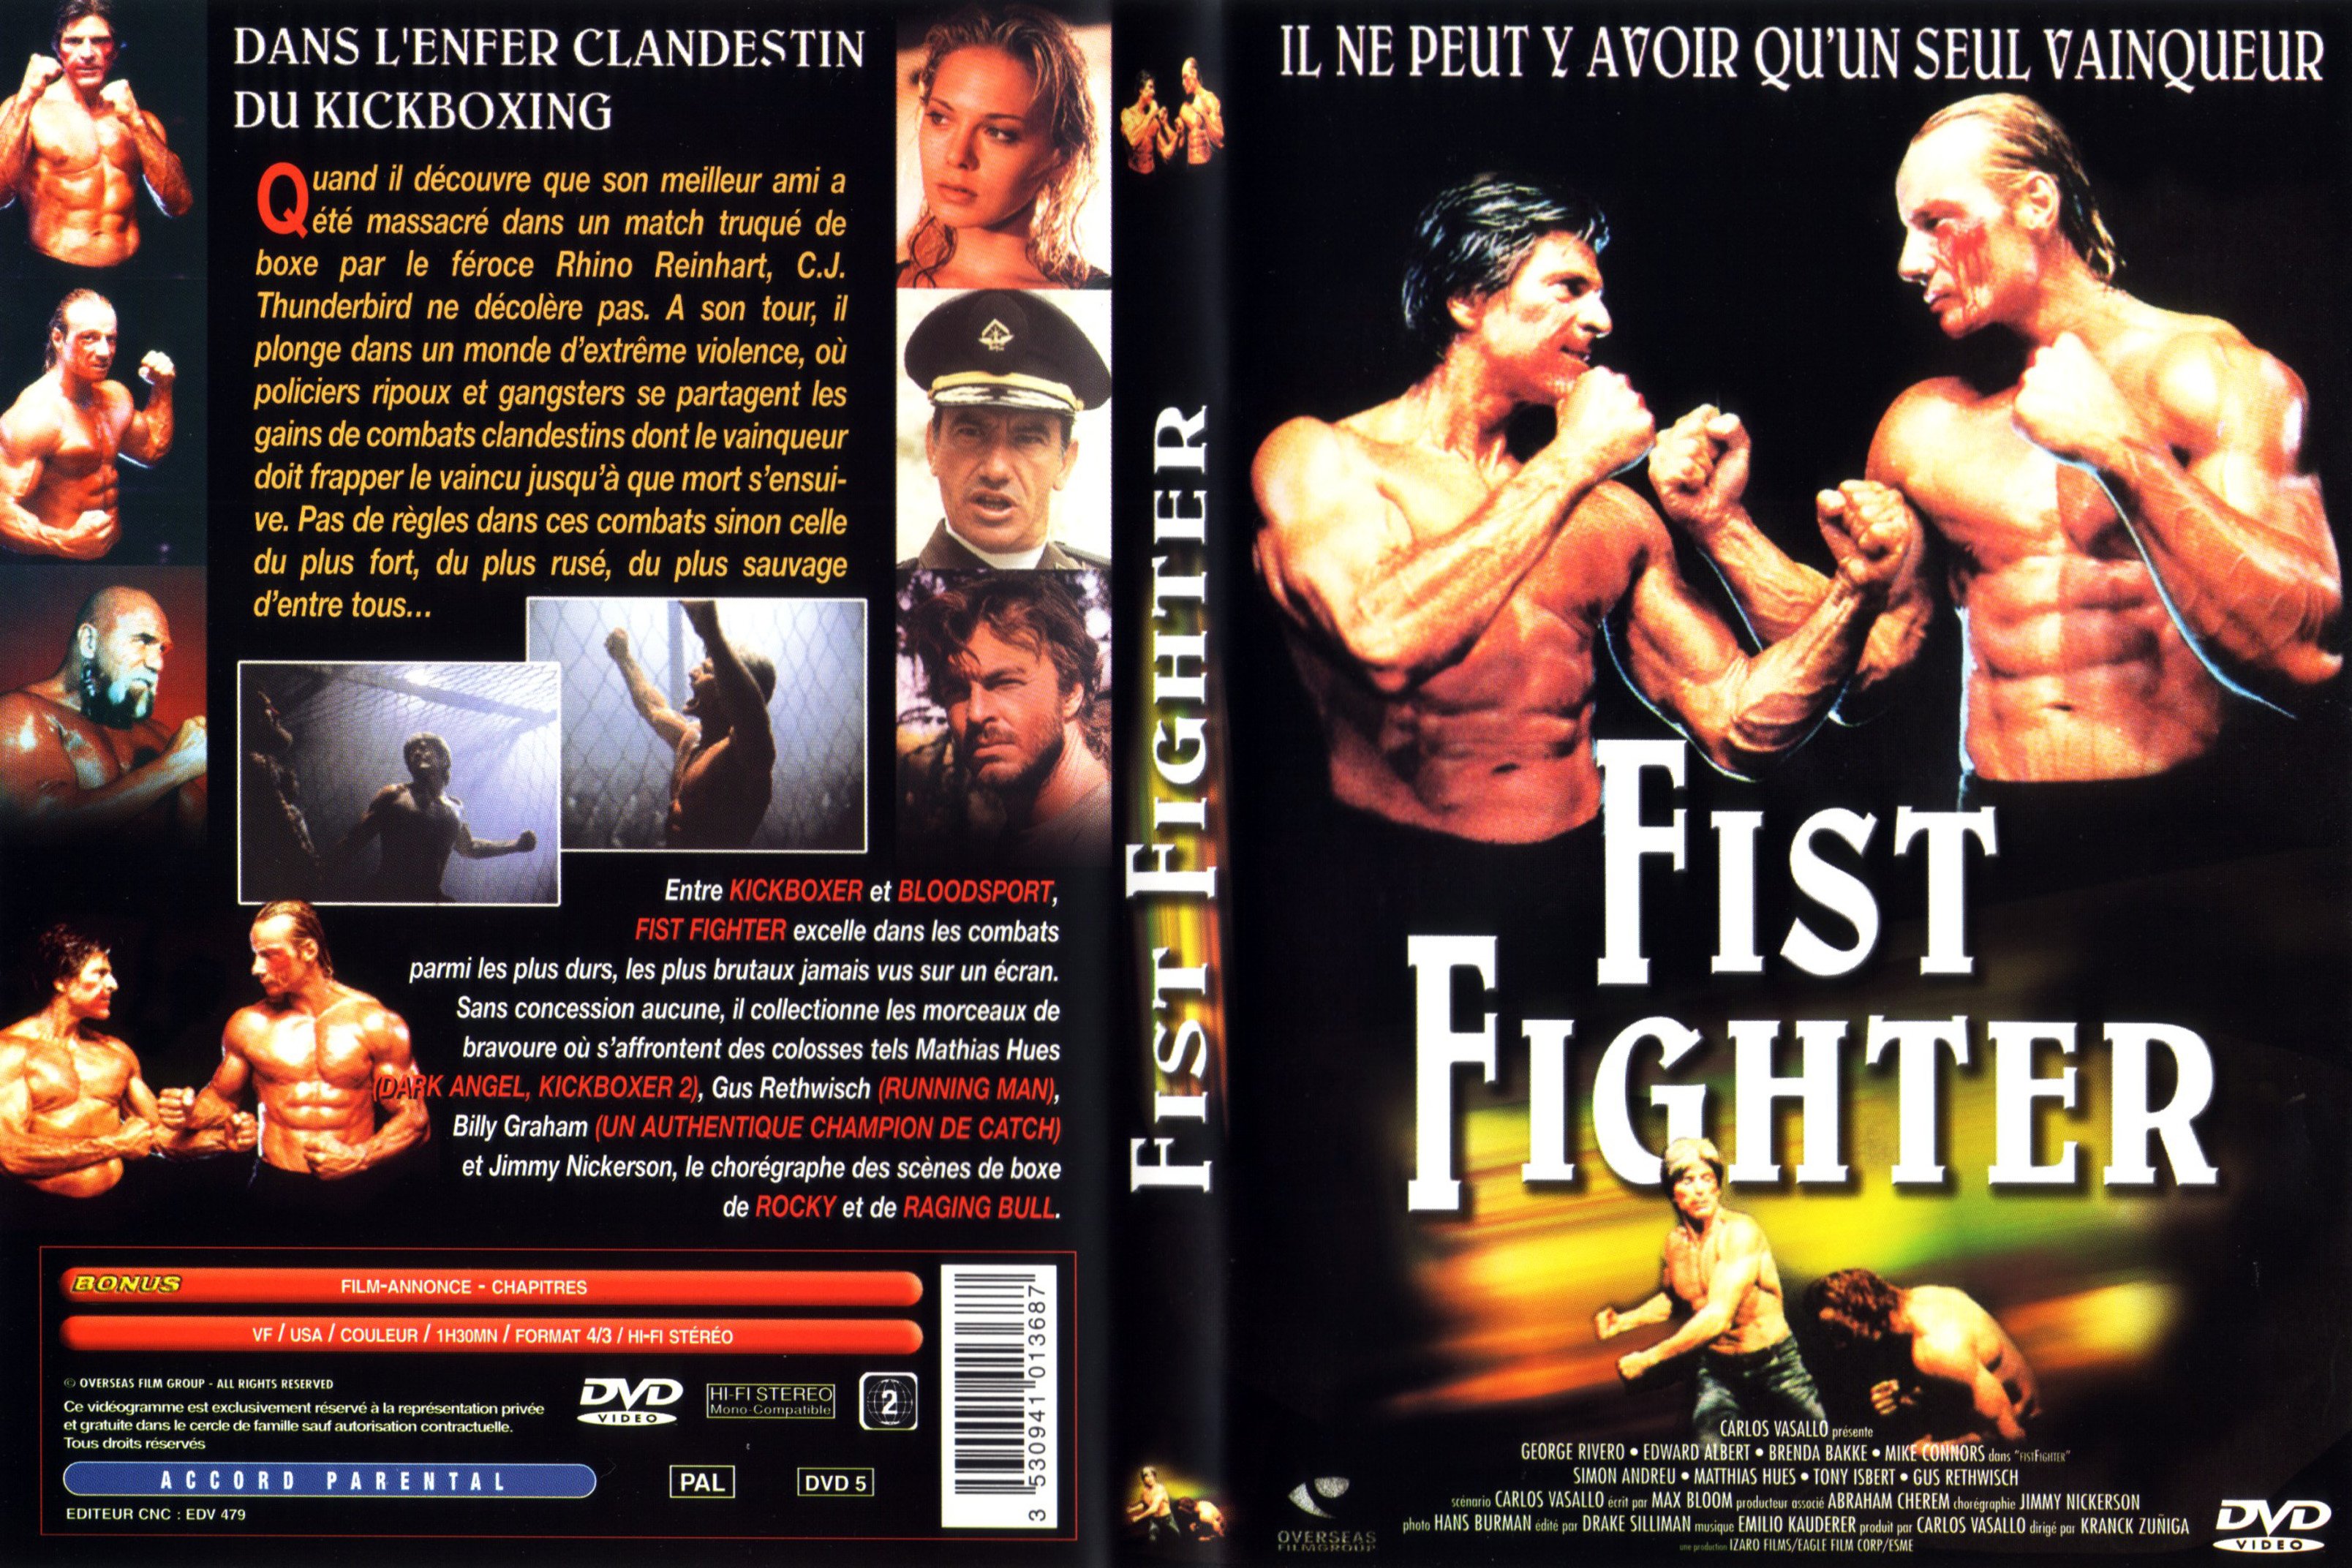 Jaquette DVD Fist fighter